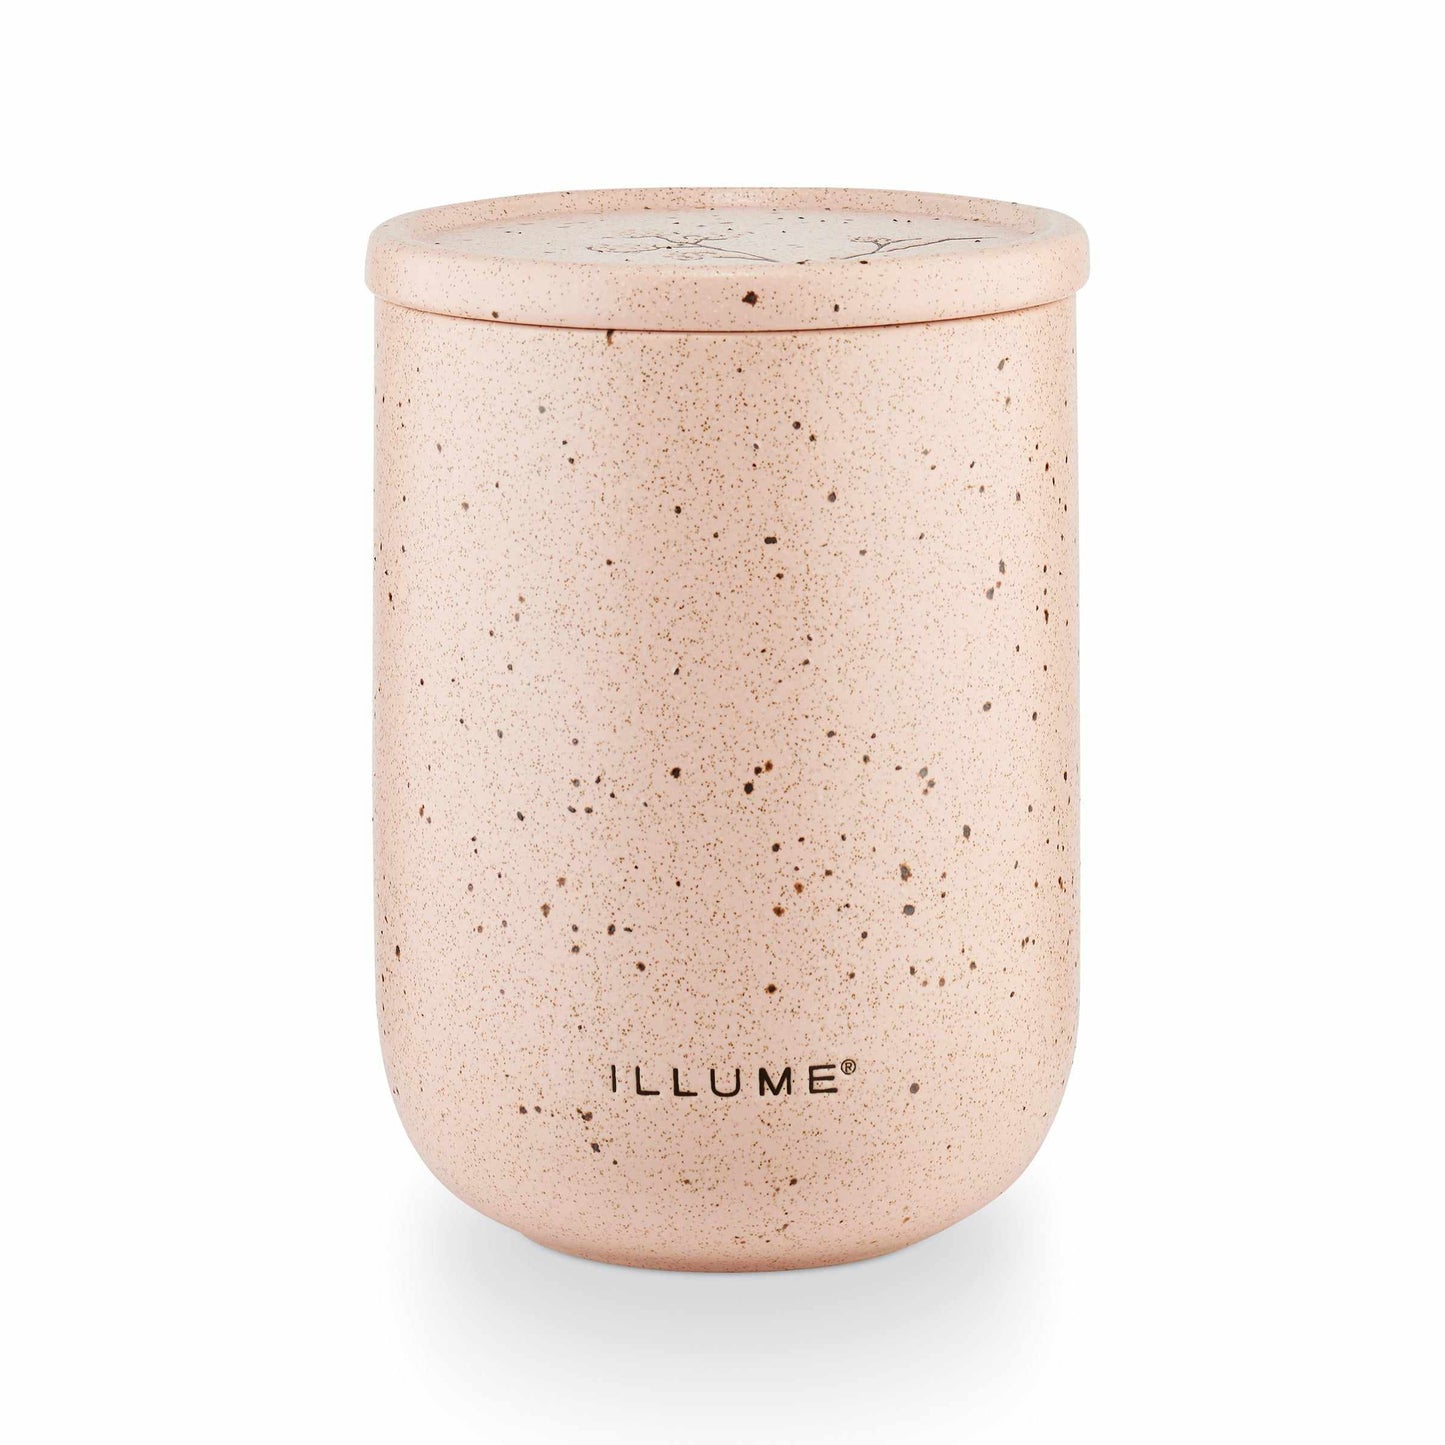 Illume Large Rosewood Cassis Outdoor Ceramic Candles